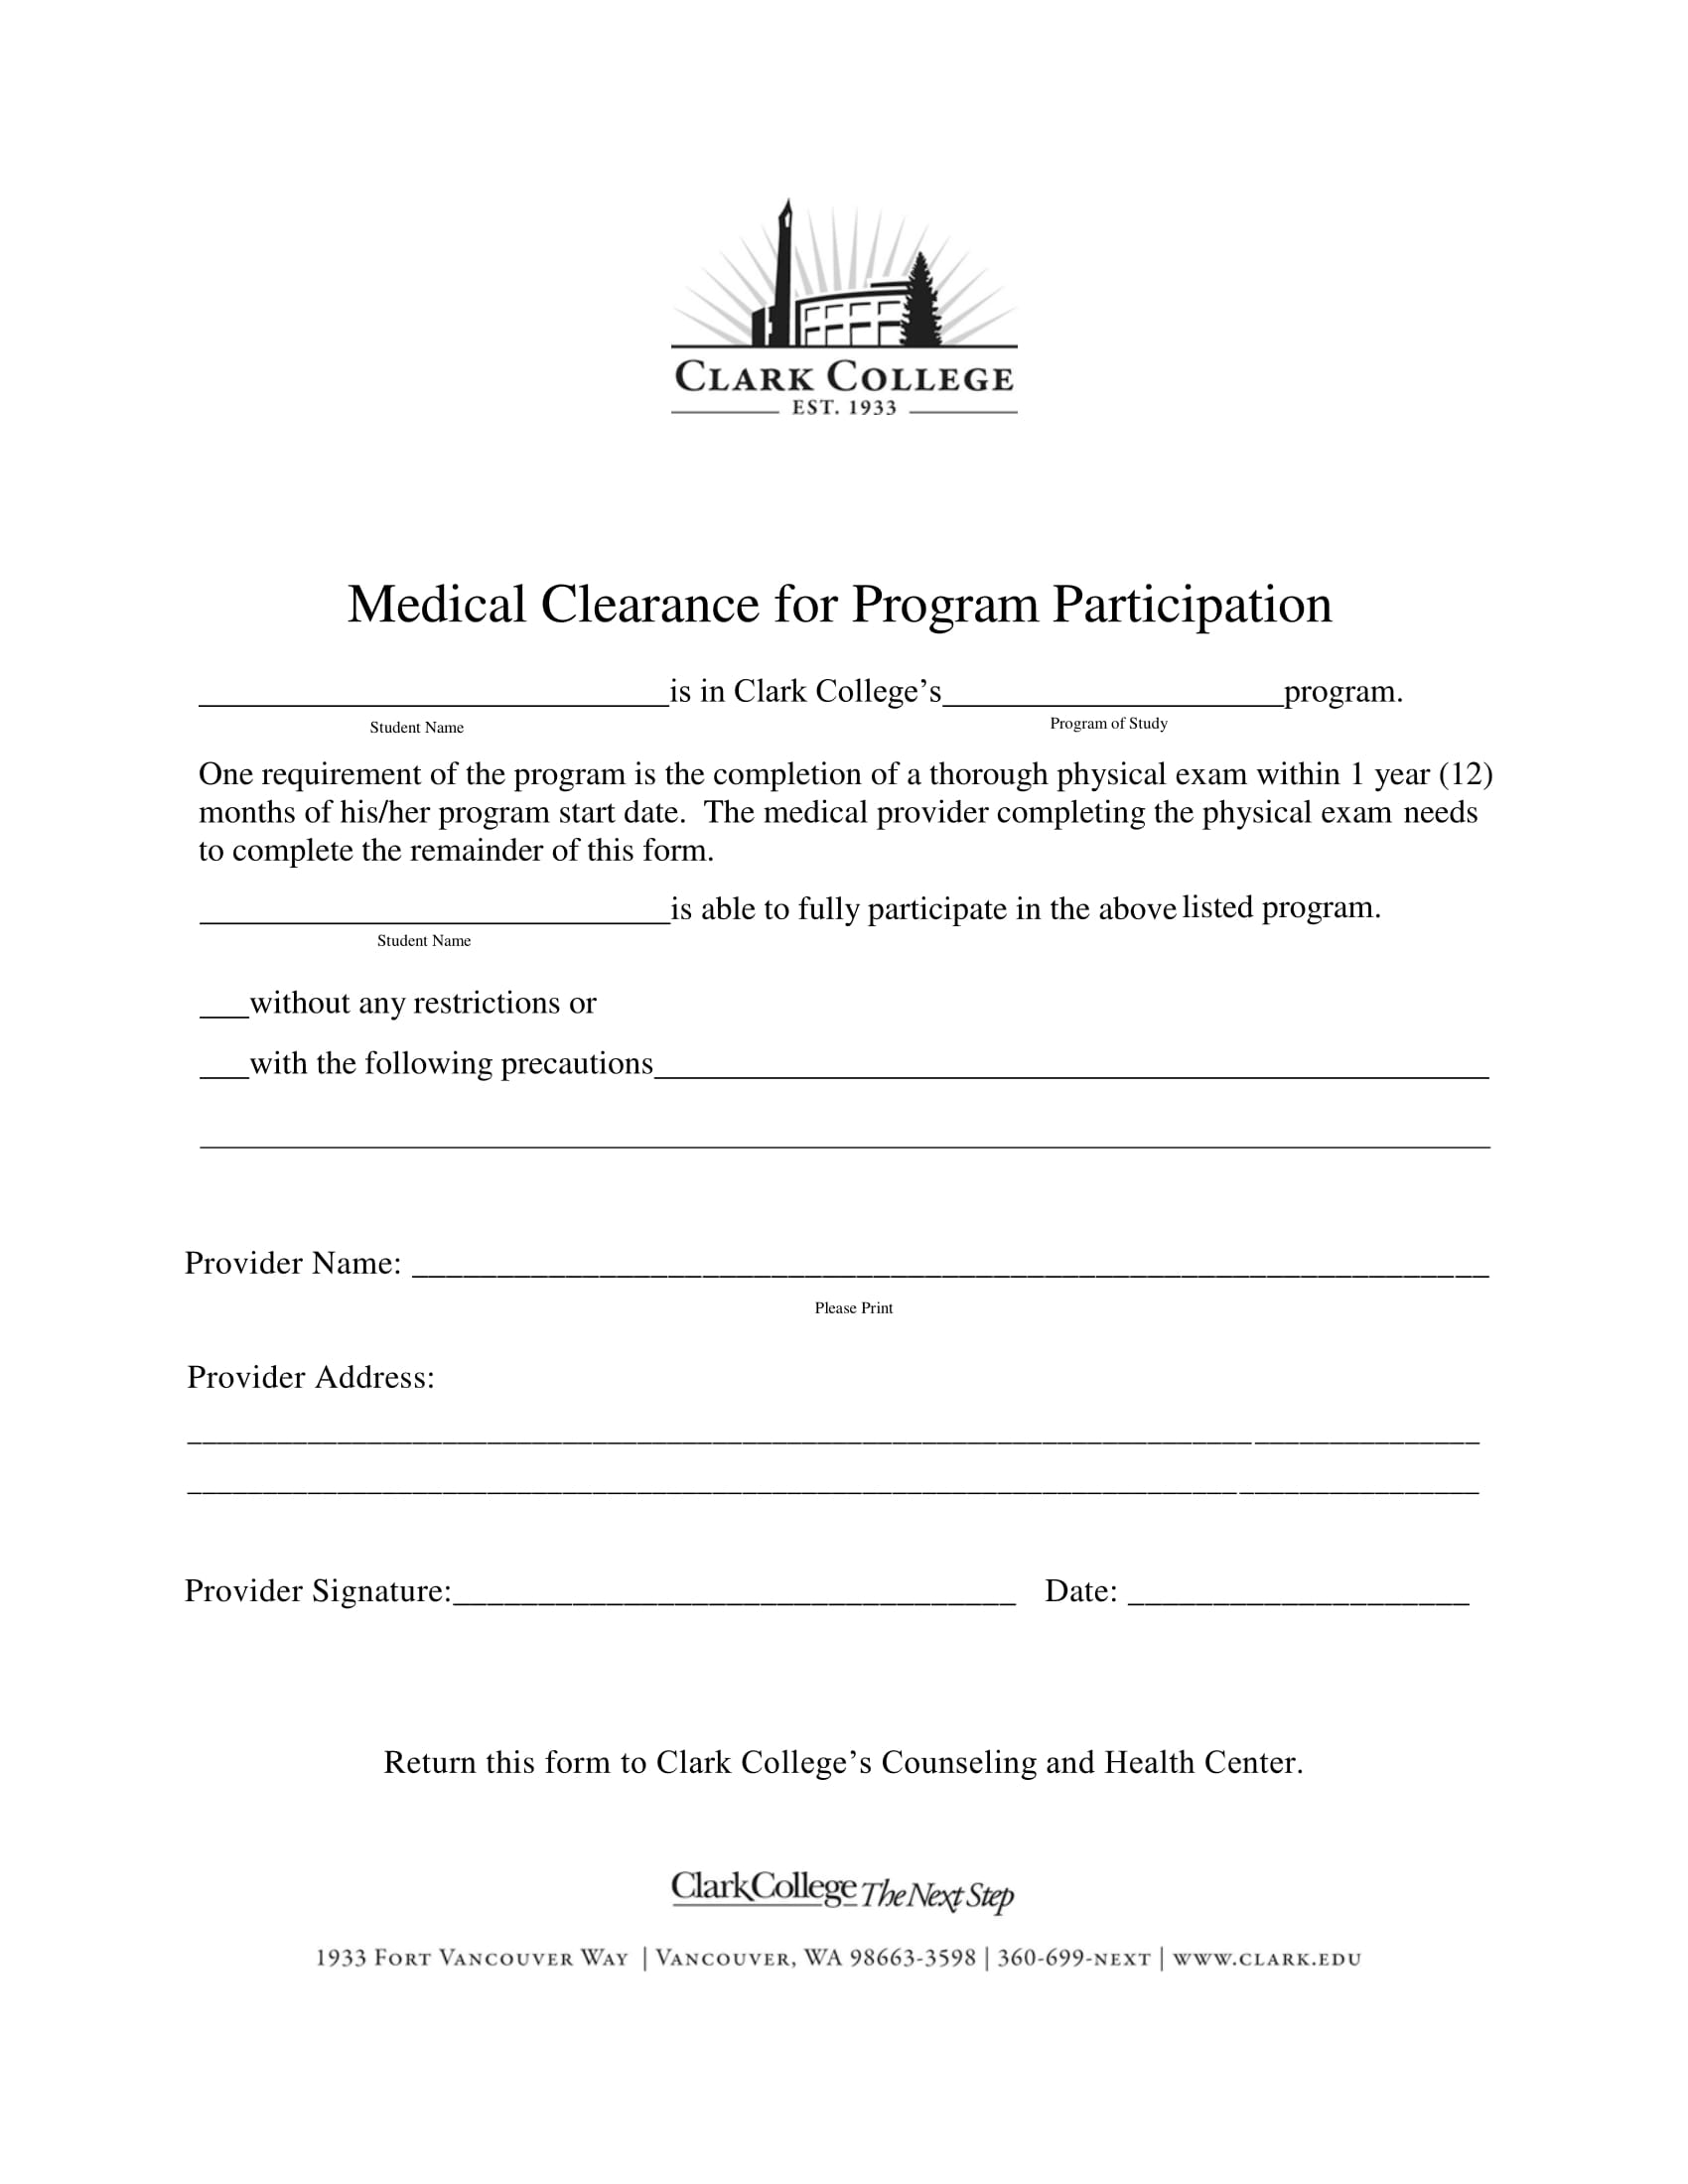 college program medical clearance form 1